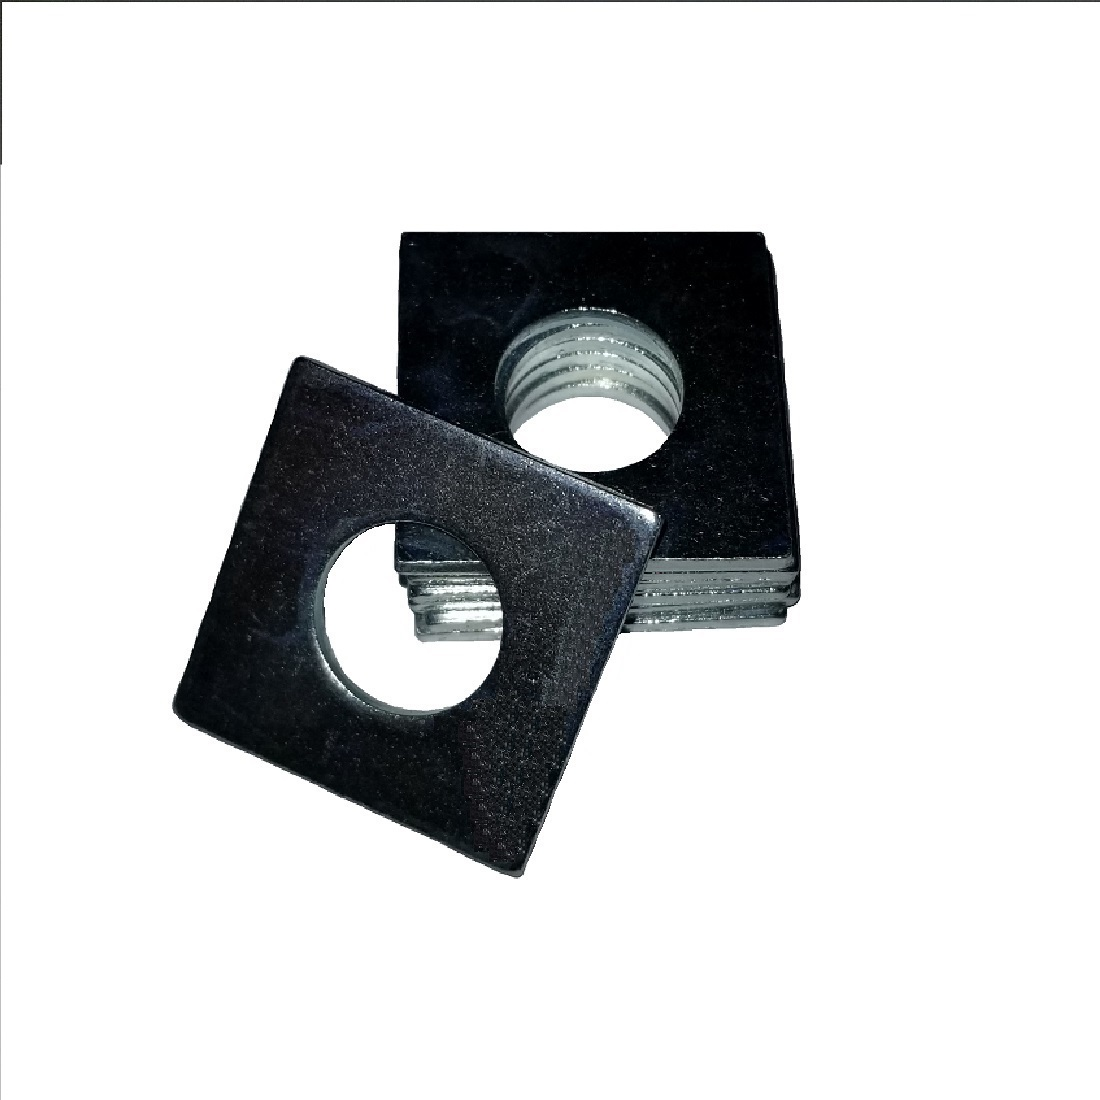 Square OD Washer - 0.130 ID, 0.175 OD, 0.032 Thick, Low Carbon Steel - Soft, Black Oxide